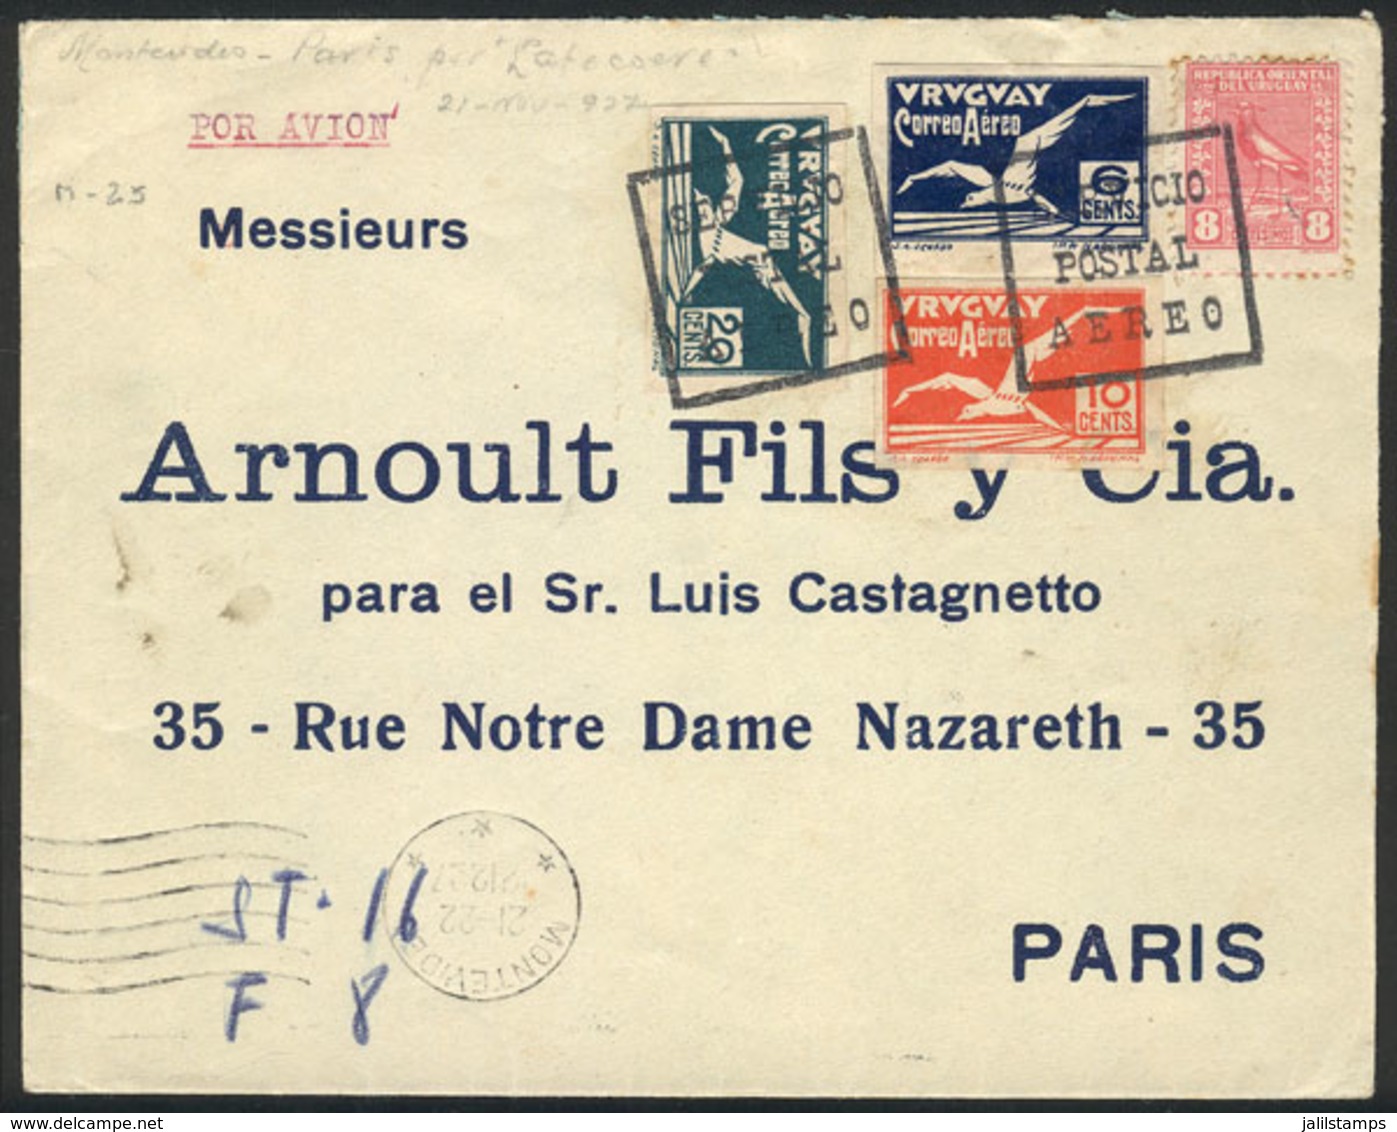 1911 URUGUAY: Airmail Cover Sent From Montevideo To Paris On 2/DE/1927, VF Quality! - Uruguay